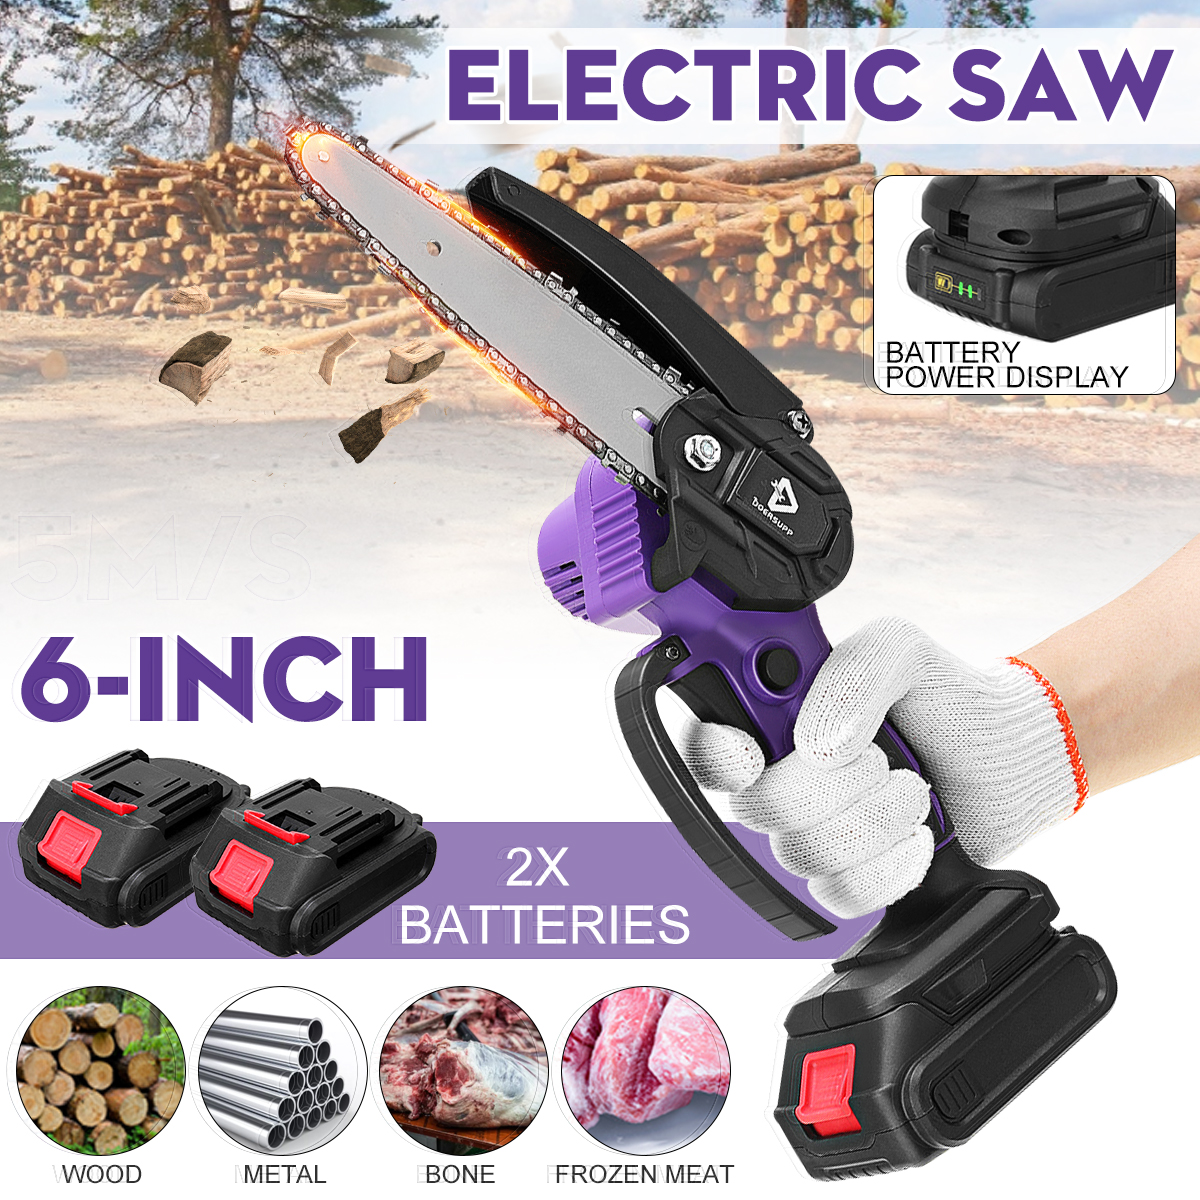 Doersupp-6-Inch-Mini-Electric-Chain-Saw-W-None12pcs-Battery-Woodworking-Pruning-Chainsaw-Tool-Wood-C-1879318-1